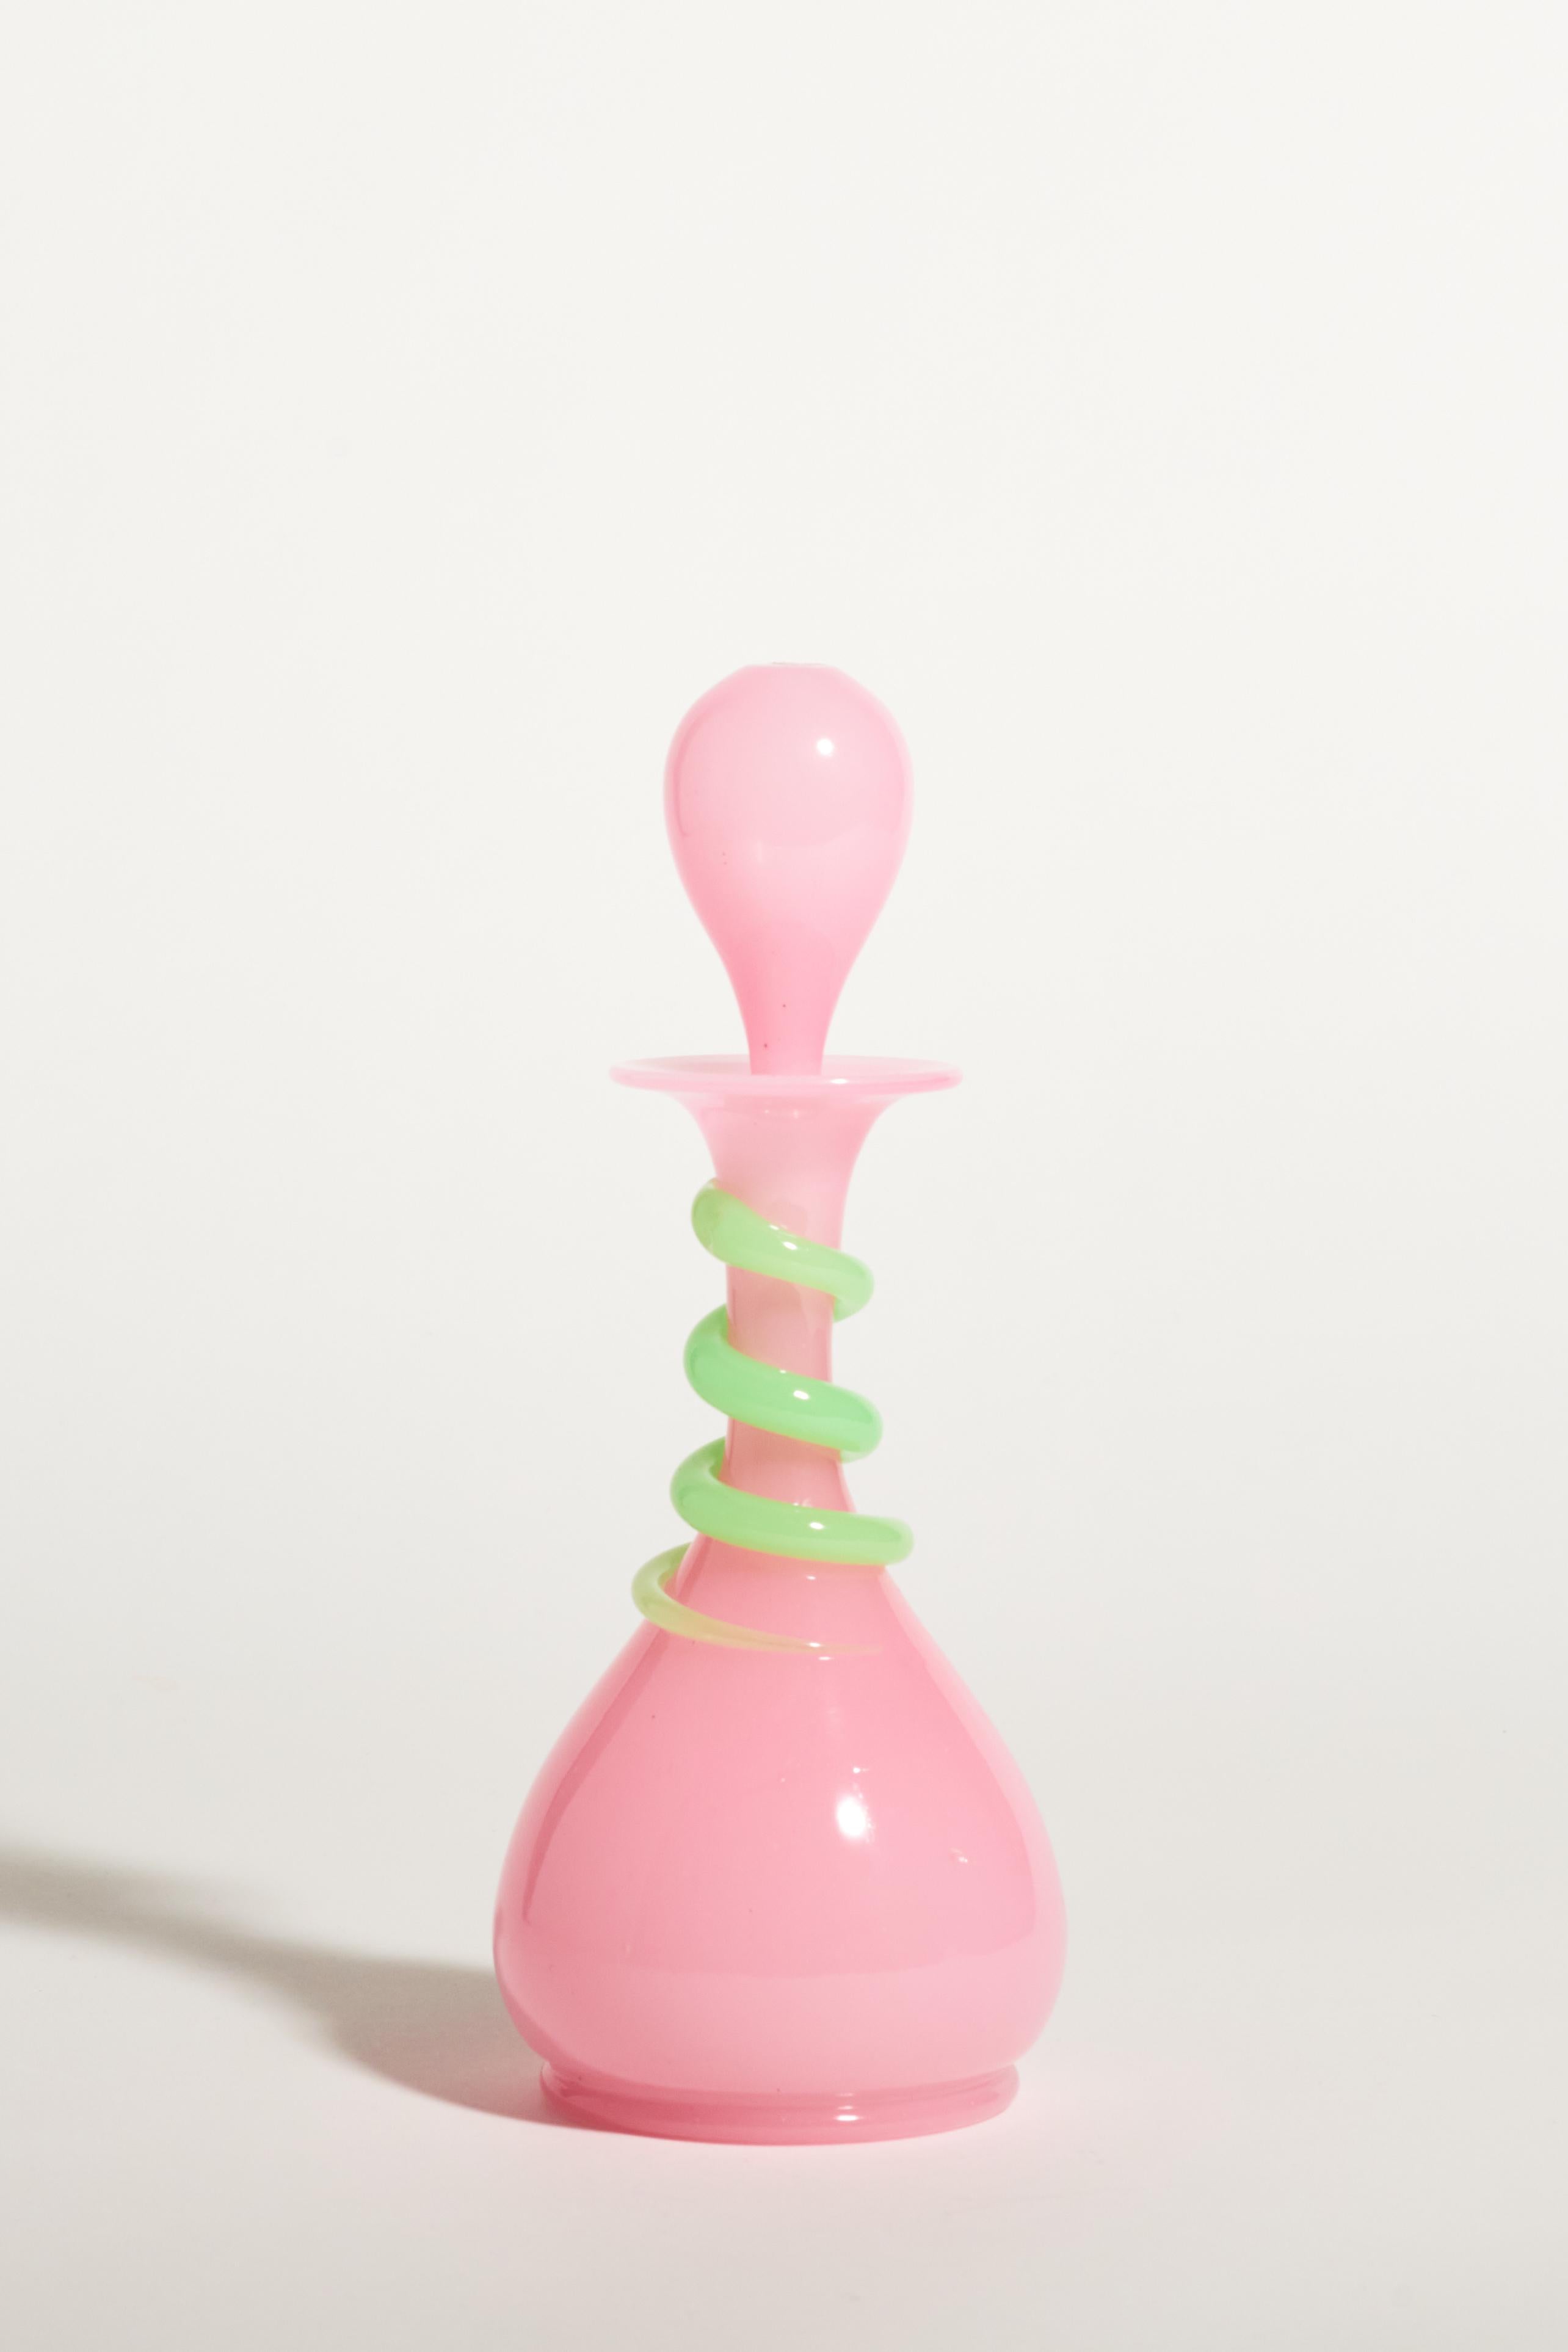 Blush pink classically shaped decanter with pale green applied glass snake coiled around the neck.